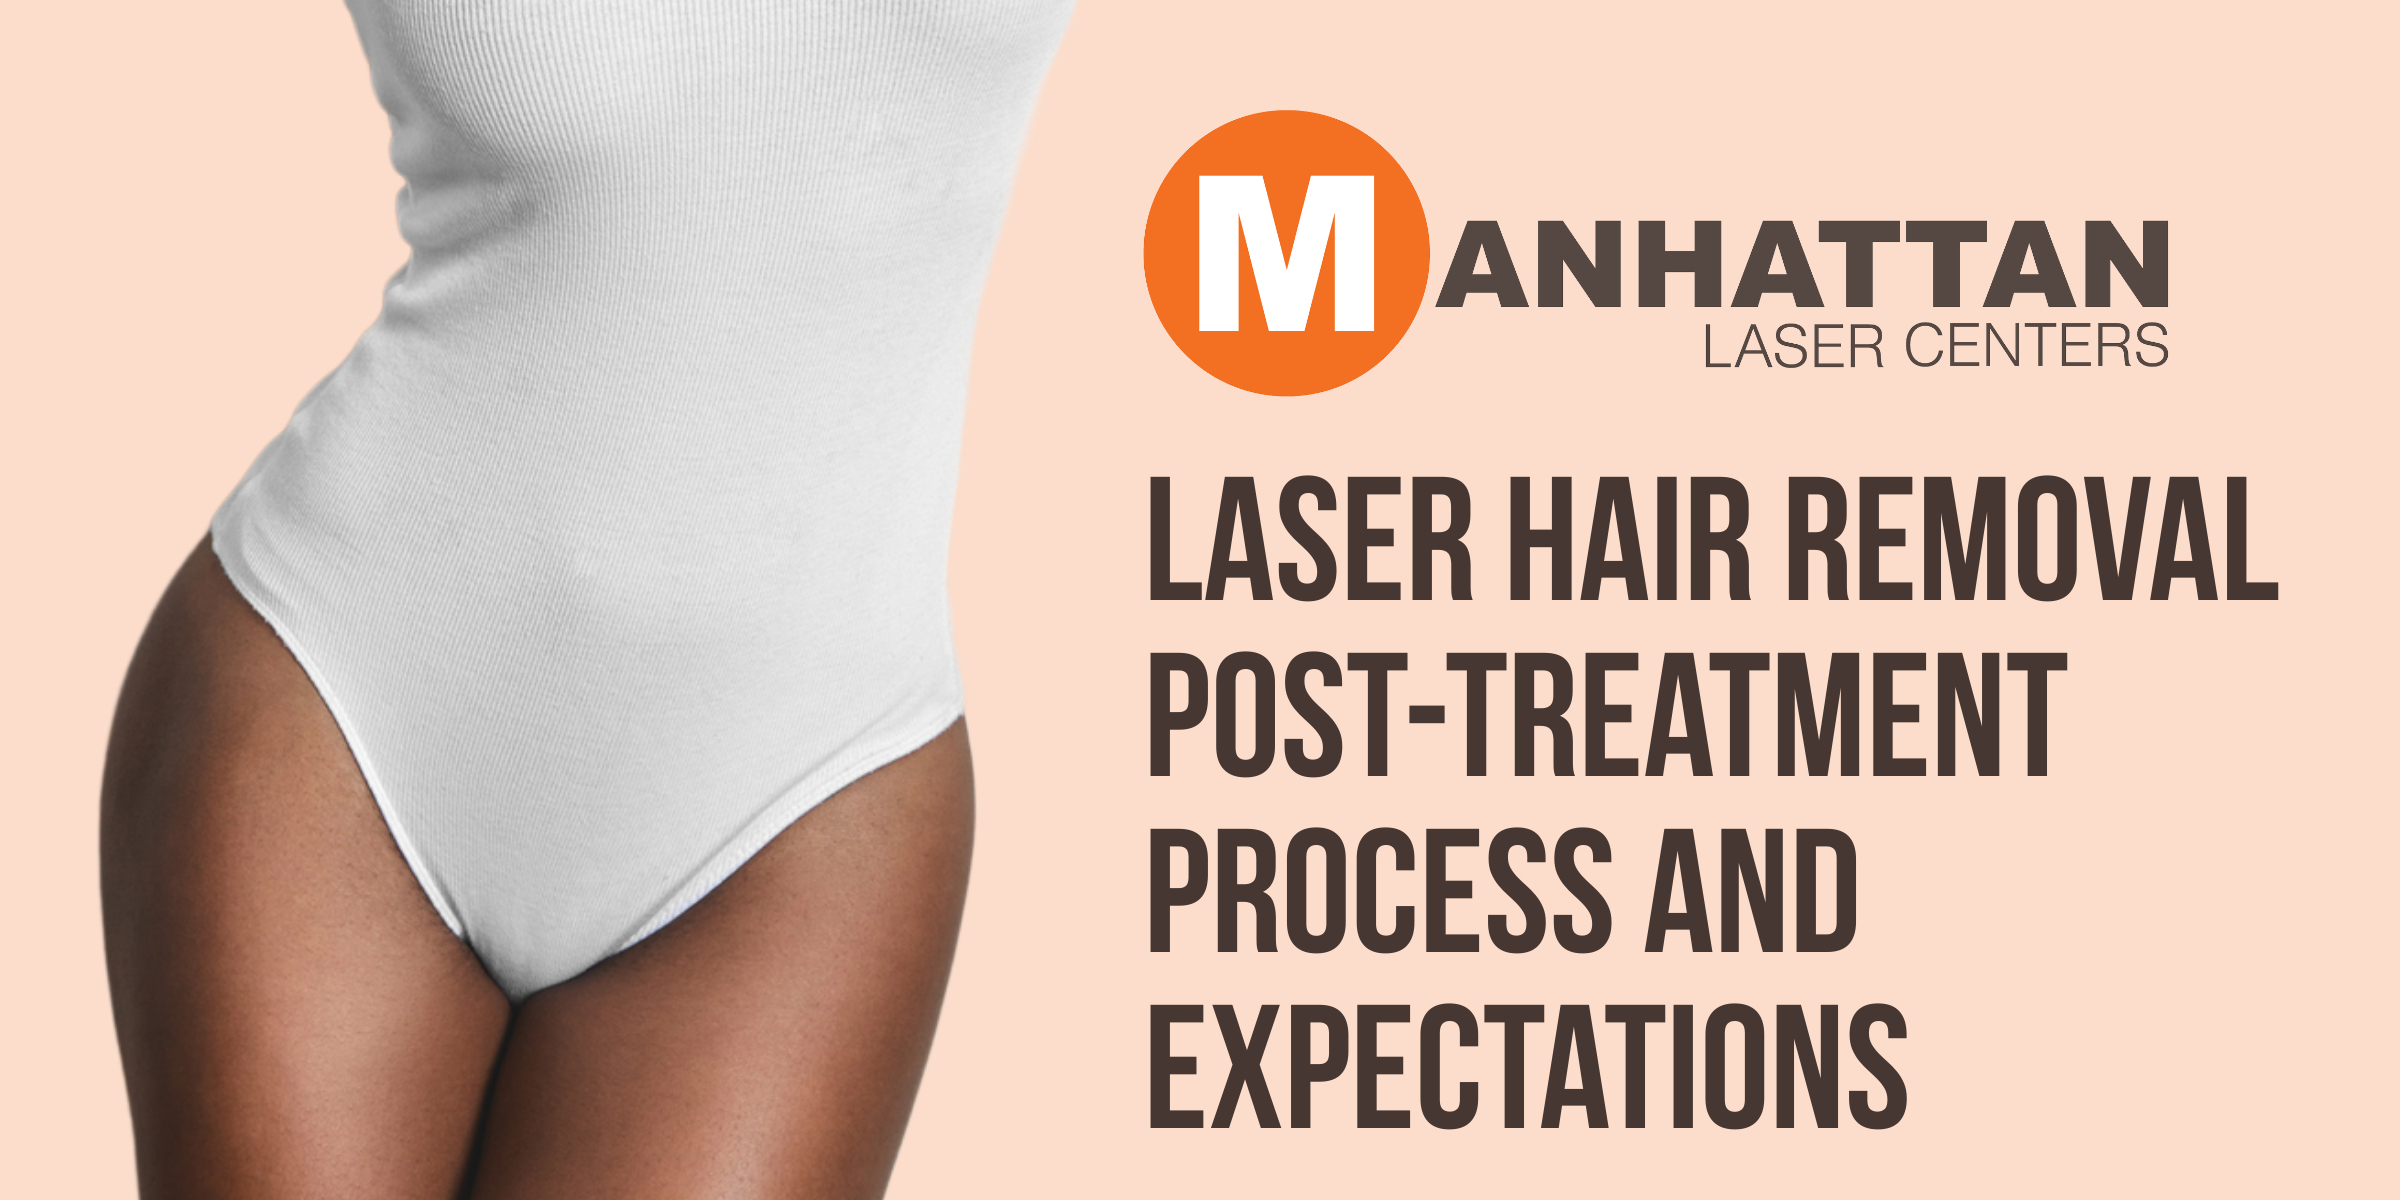 Laser Hair Removal Post-Treatment Process and Expectations